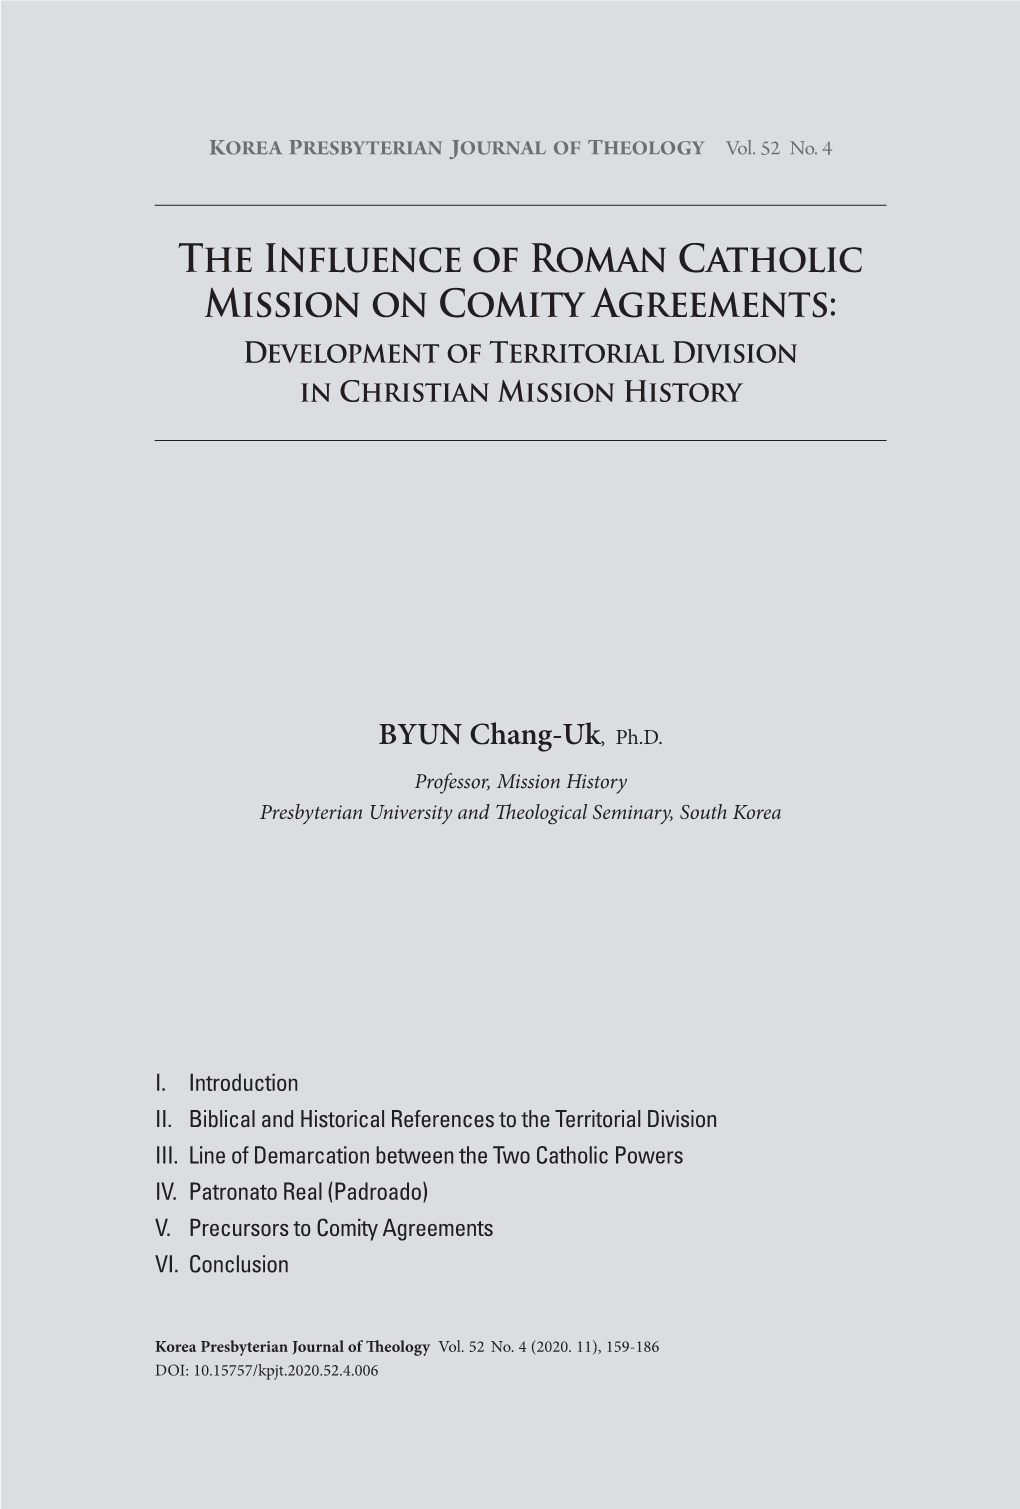 The Influence of Roman Catholic Mission on Comity Agreements: Development of Territorial Division in Christian Mission History